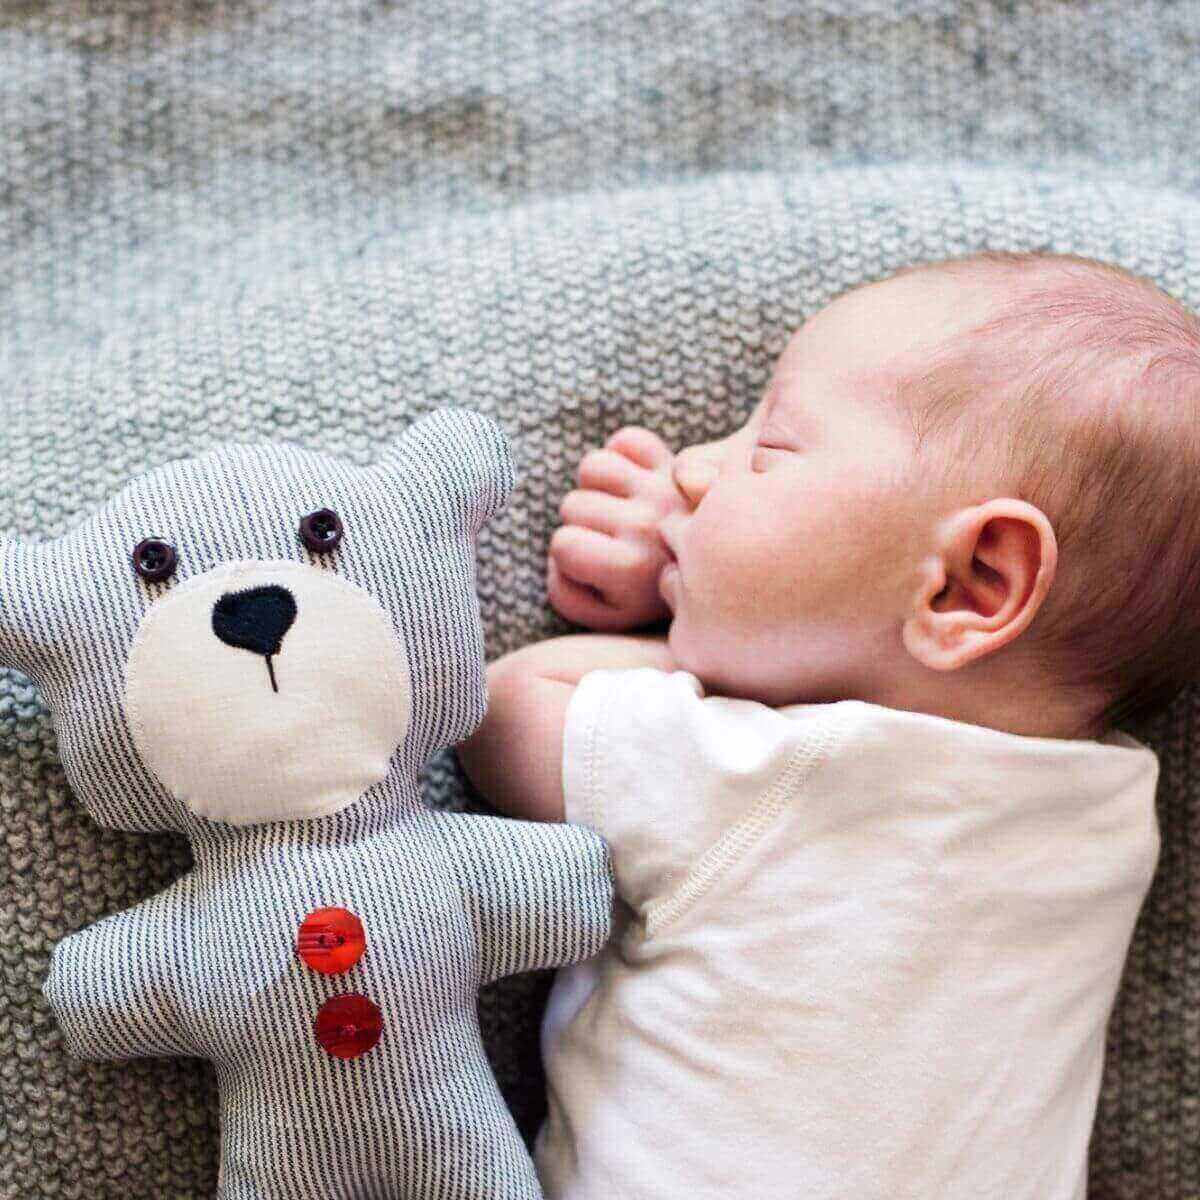 Newborn baby with eyes closed laying on stomach with a white onesie on. A light grey and white blanket is underneath the baby and a blue and white striped bear with red buttons is laying next to the baby